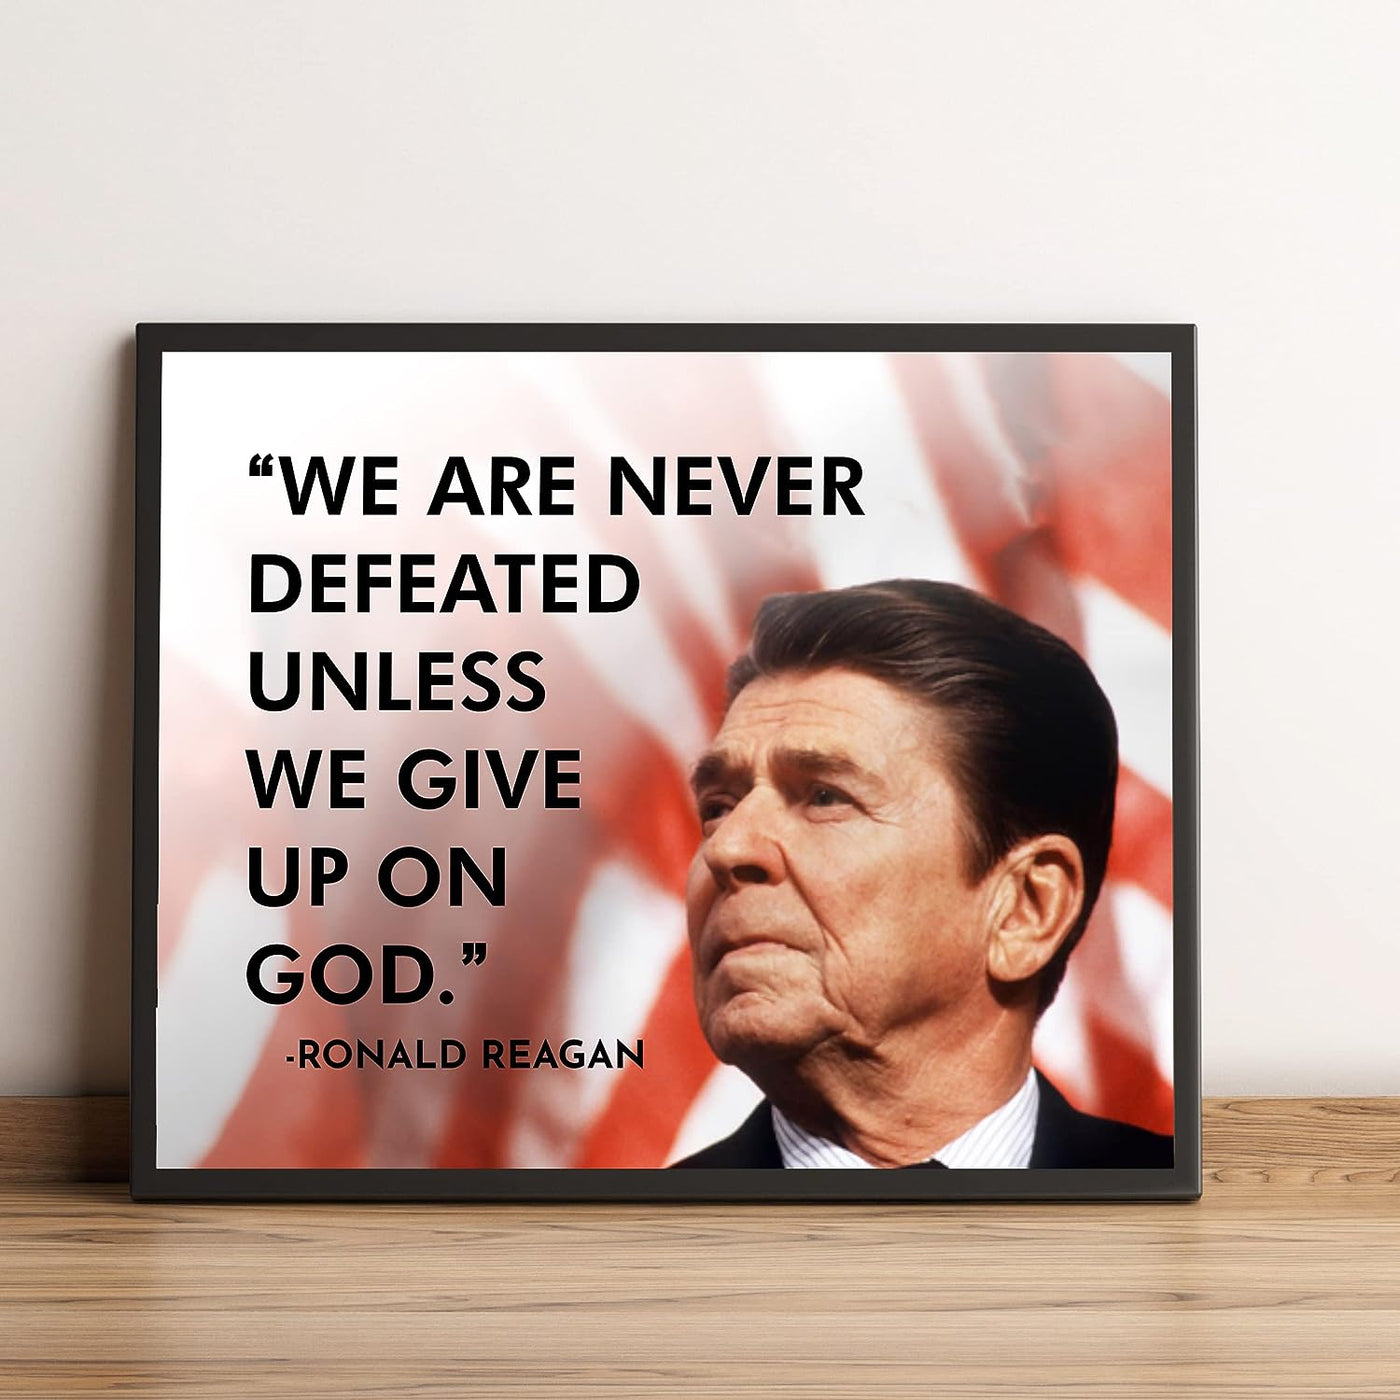 Ronald Reagan Quotes Wall Art-"We Are Never Defeated Unless We Give Up On God"- 10 x 8" Presidential Portrait Print-Ready to Frame. American Flag Decor for Home-Office-Library. Great Patriotic Gift.